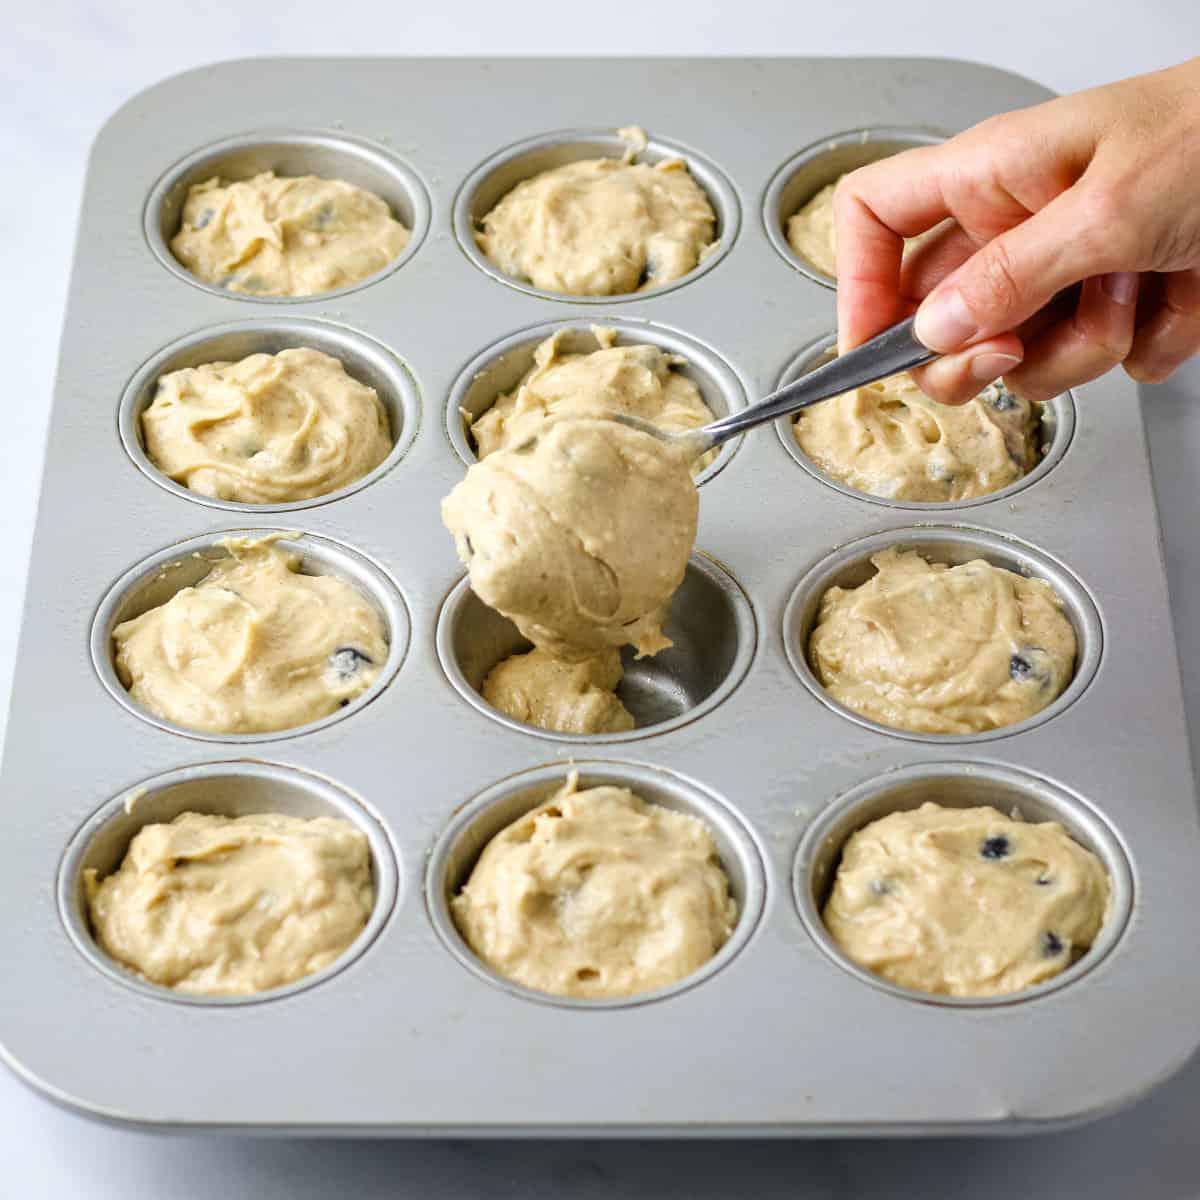 Spooning muffin batter into a greased muffin pan.